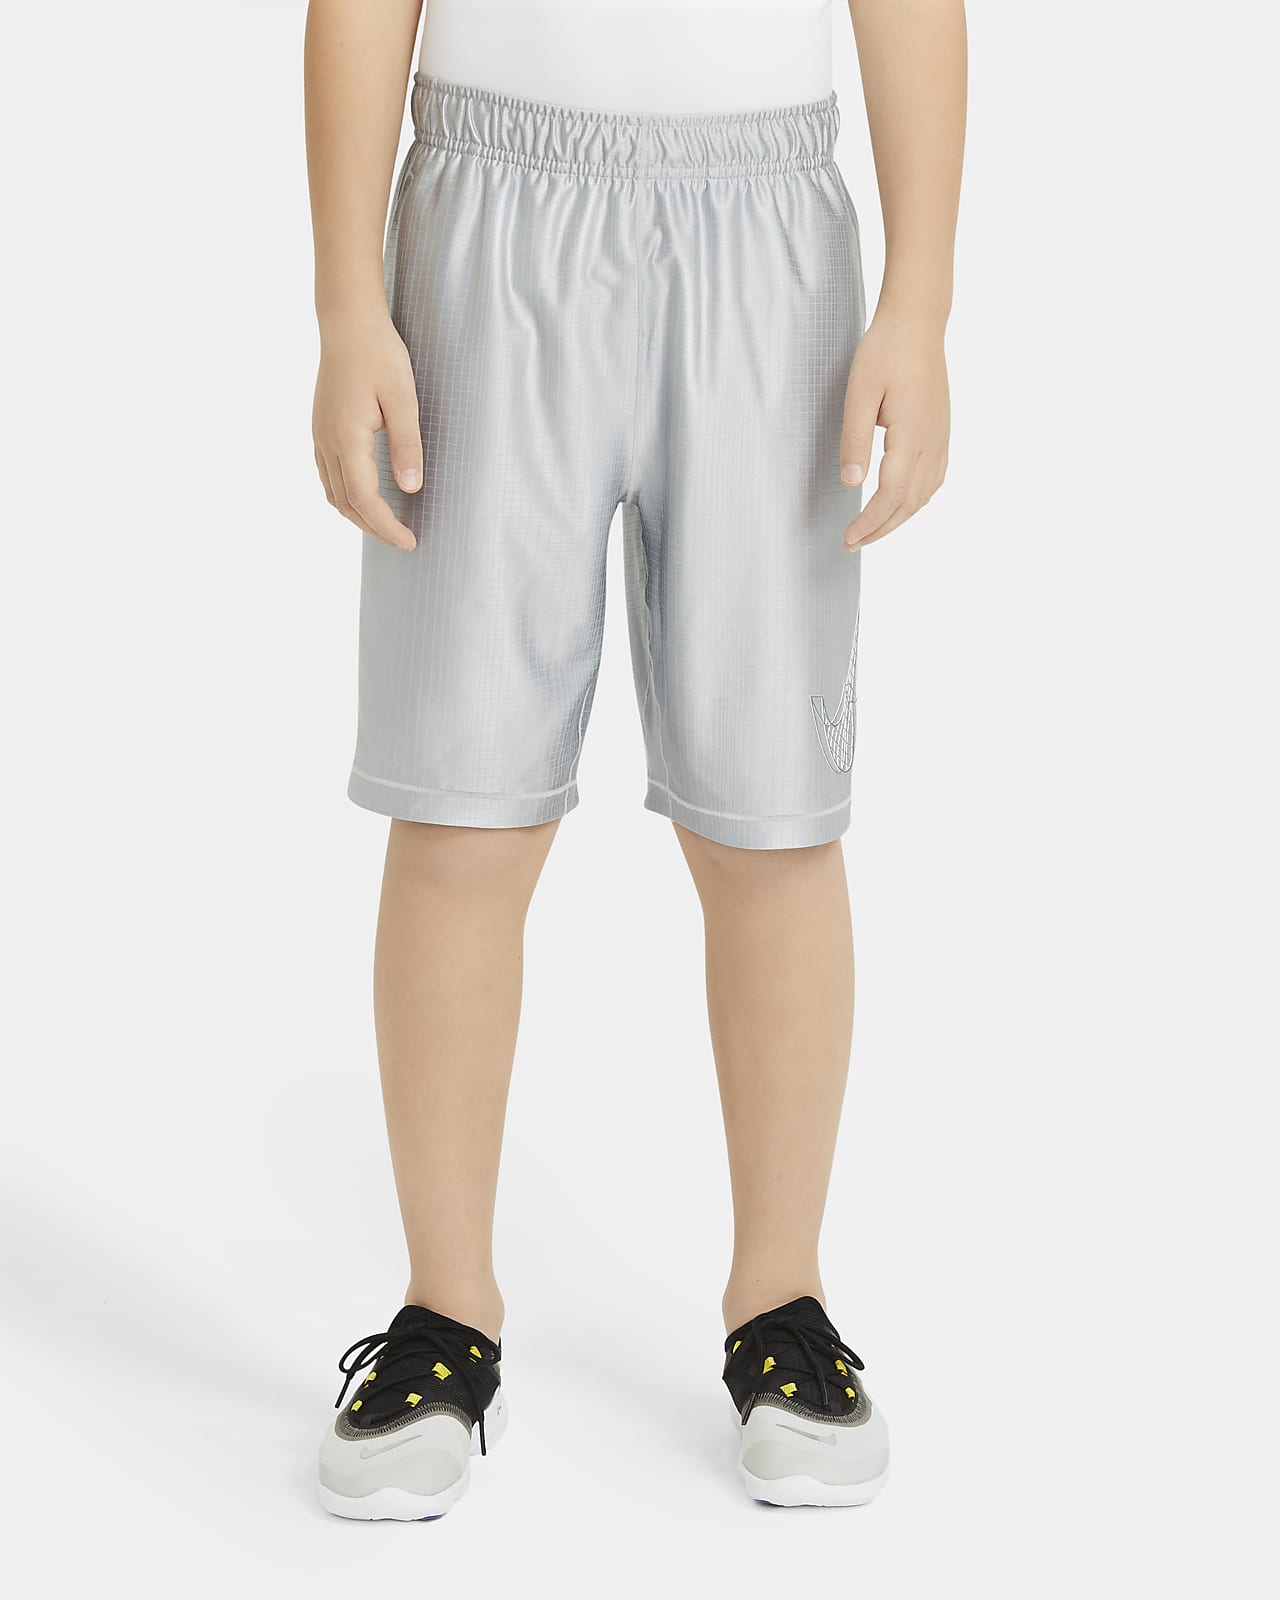 sports shorts for boys